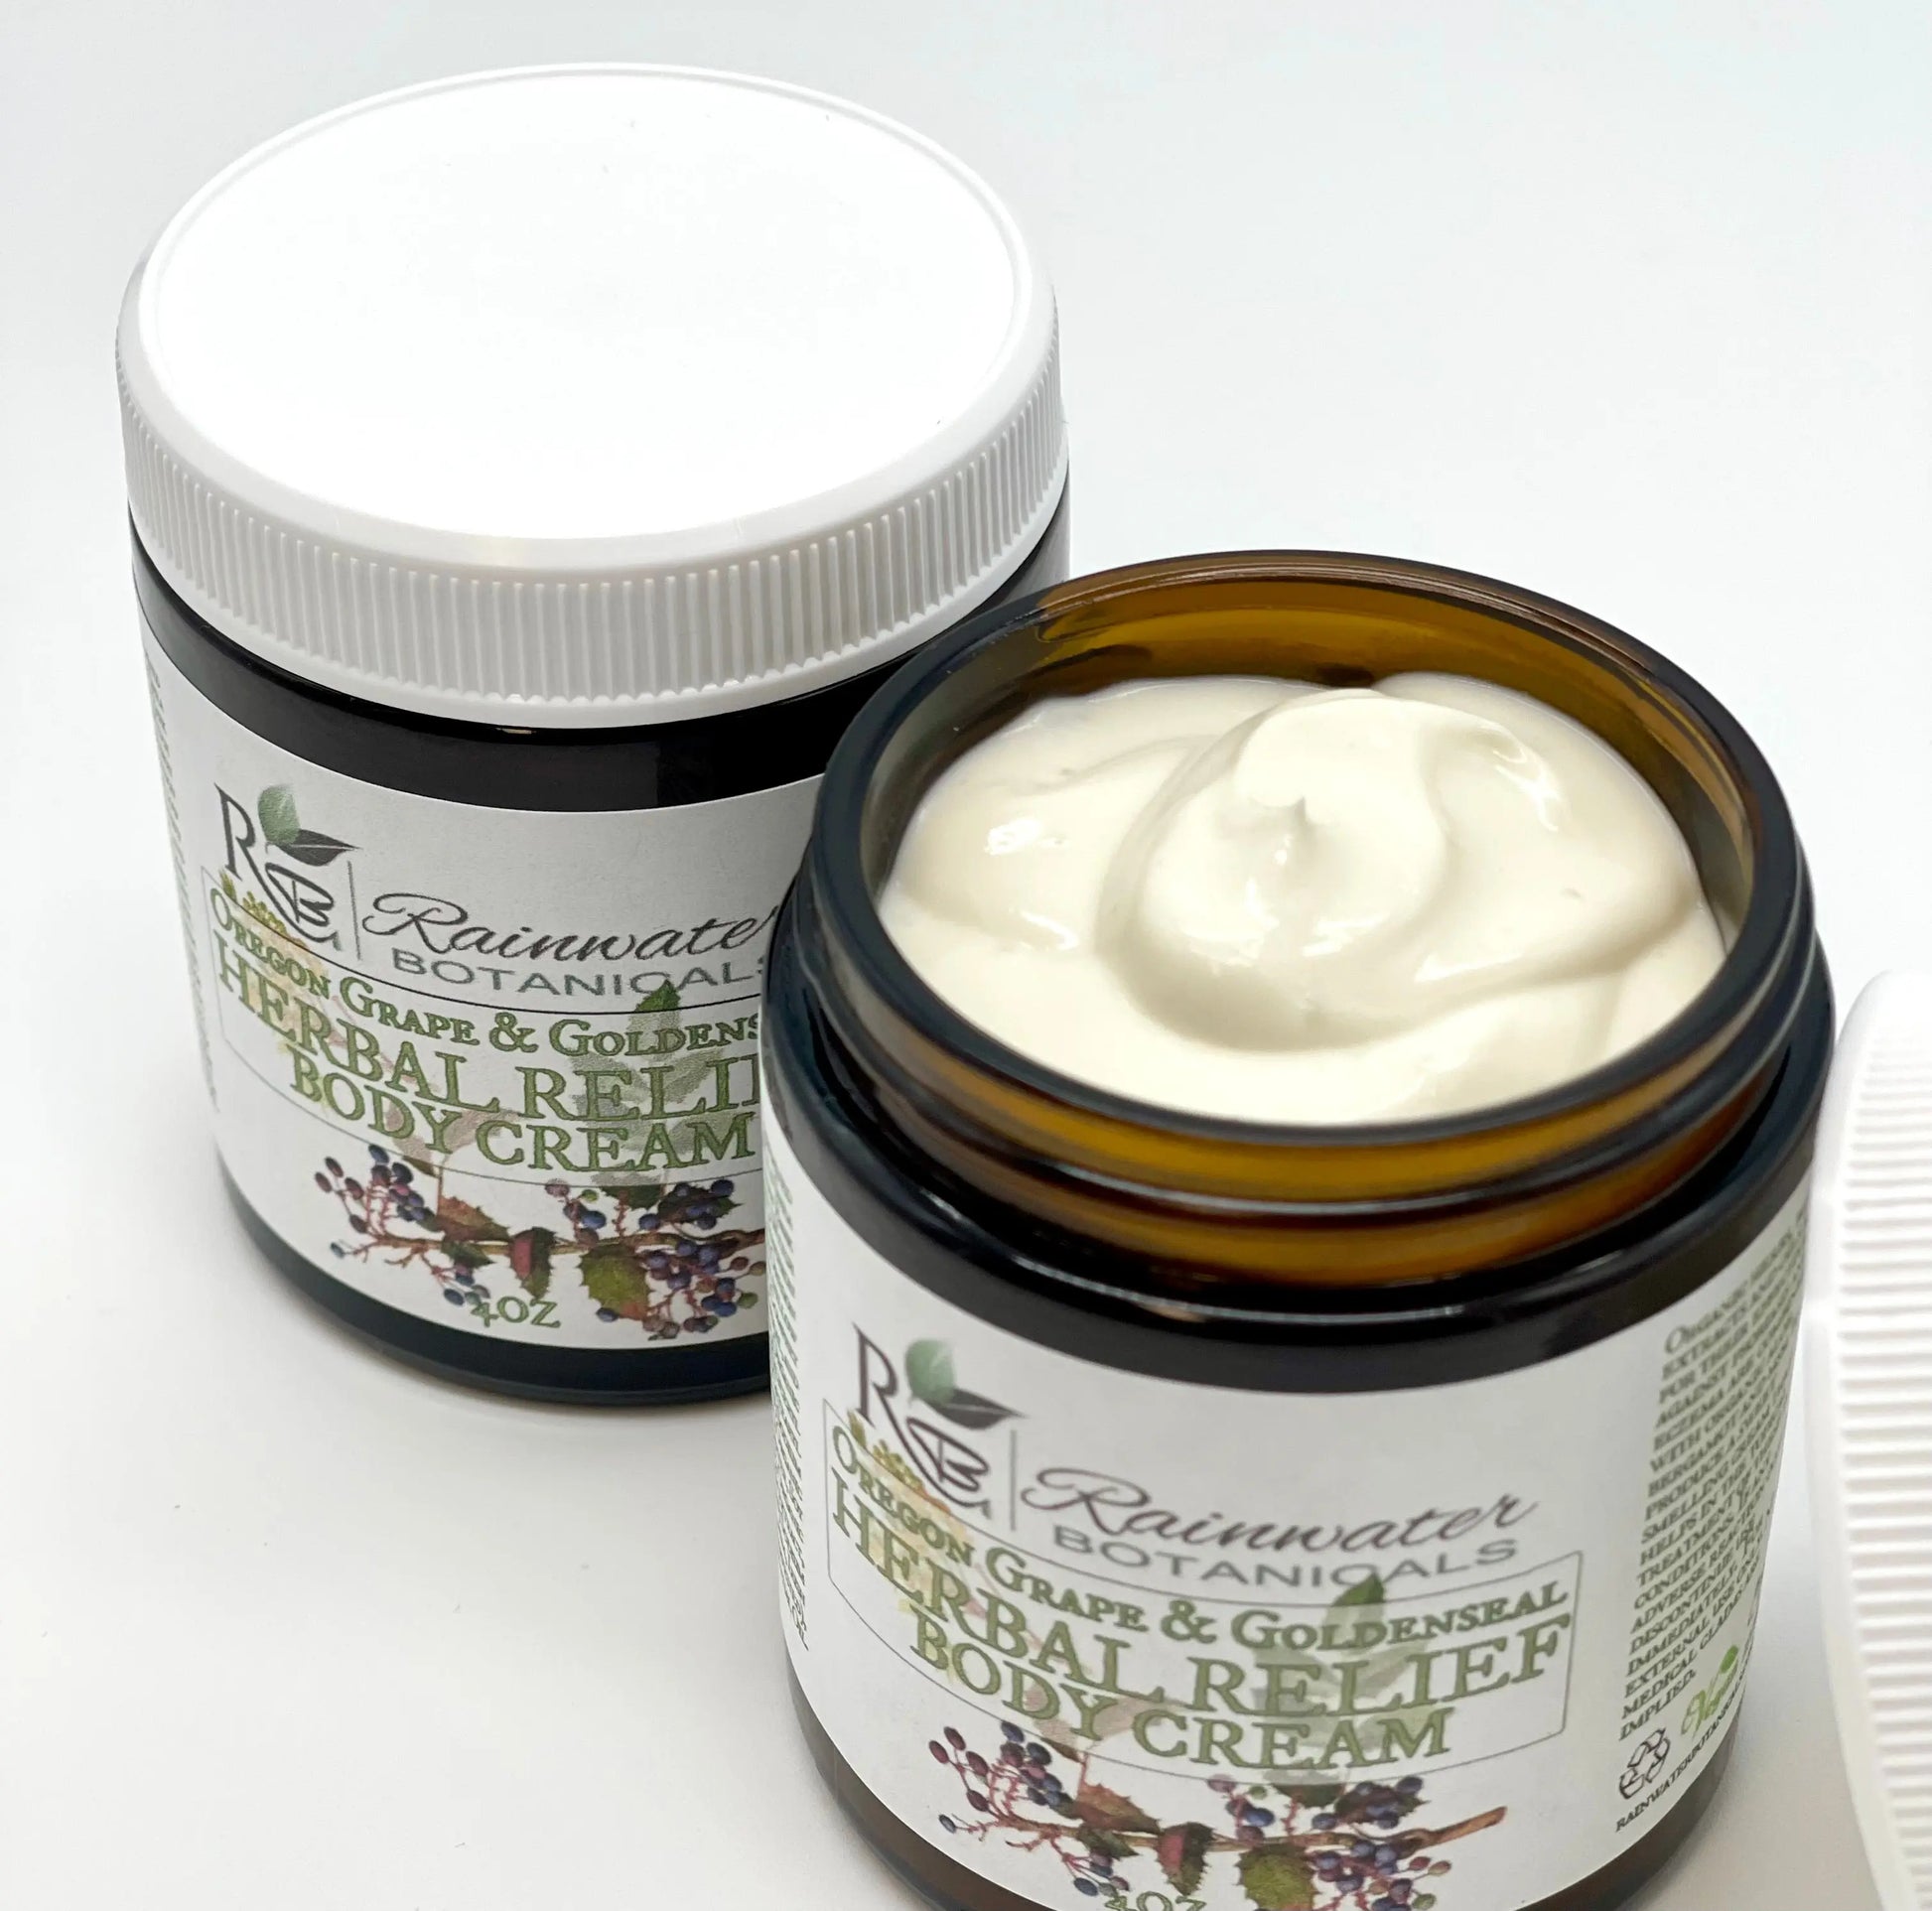 Oregon Grape Root and Golden Seal Herbal Relief Cream For Dry Itchy Skin Rainwater Botanicals